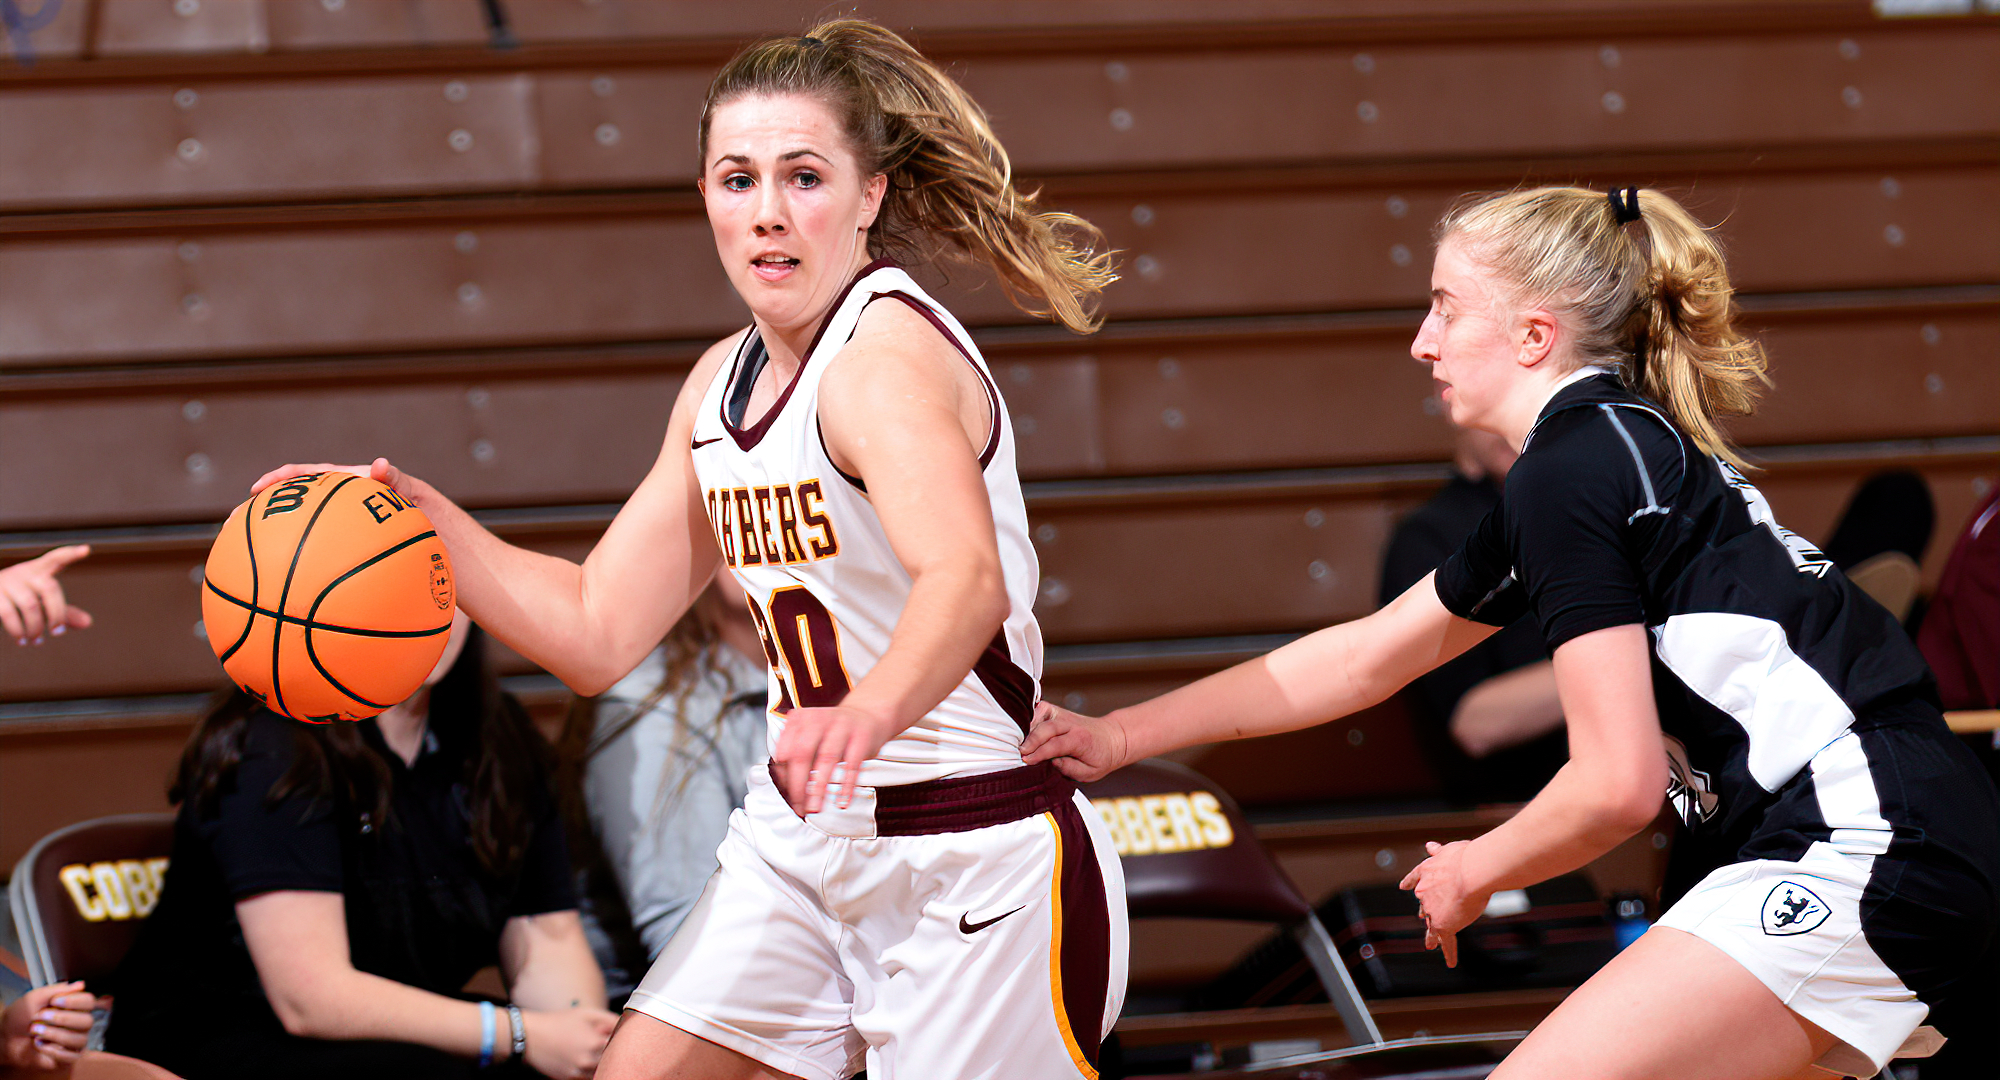 Emily Beseman finished with 17 points to go along with six rebounds, four steals and two assists in the Cobbers' win at St. Olaf.